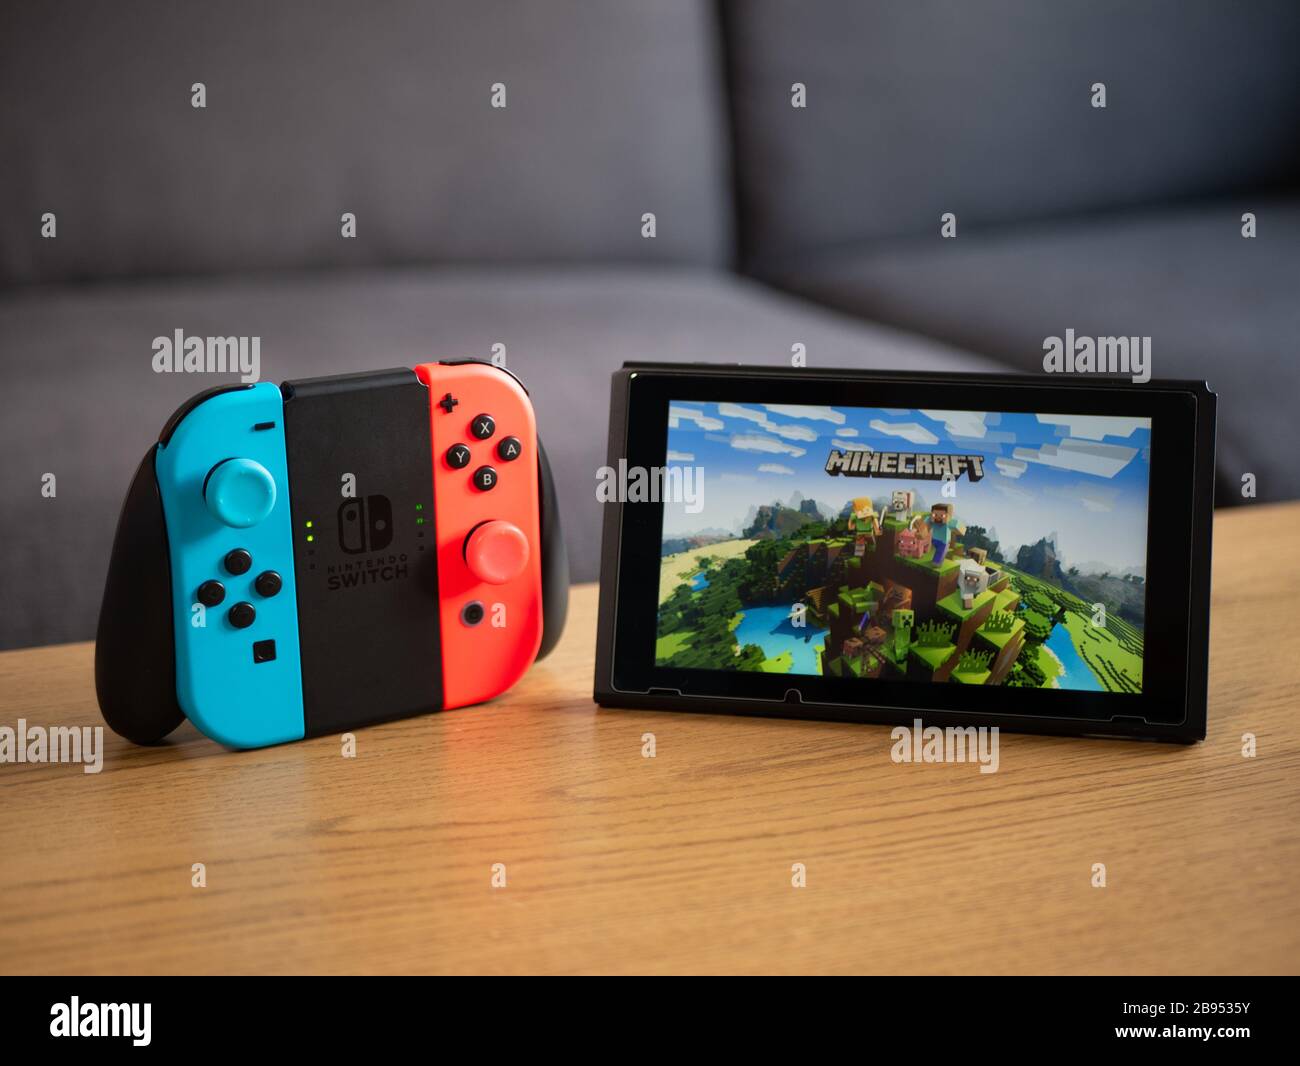 UK, March 2020: Nintendo switch minecraft game with joy con grip controller  Stock Photo - Alamy